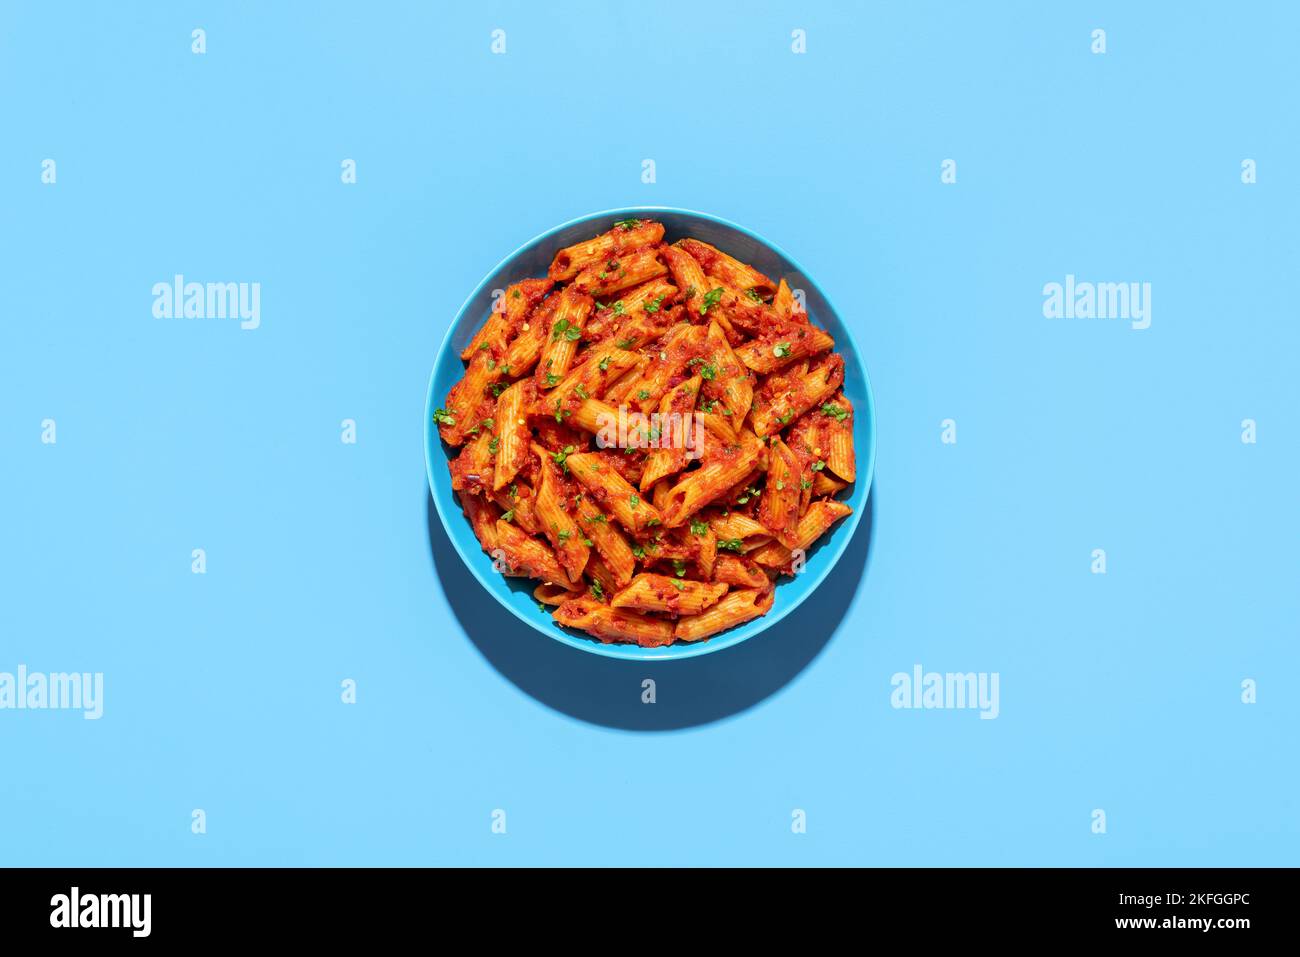 Top view with a portion of penne alla arrabbiata minimalist on a blue table. Italian dish, penne with spicy tomato sauce. Stock Photo